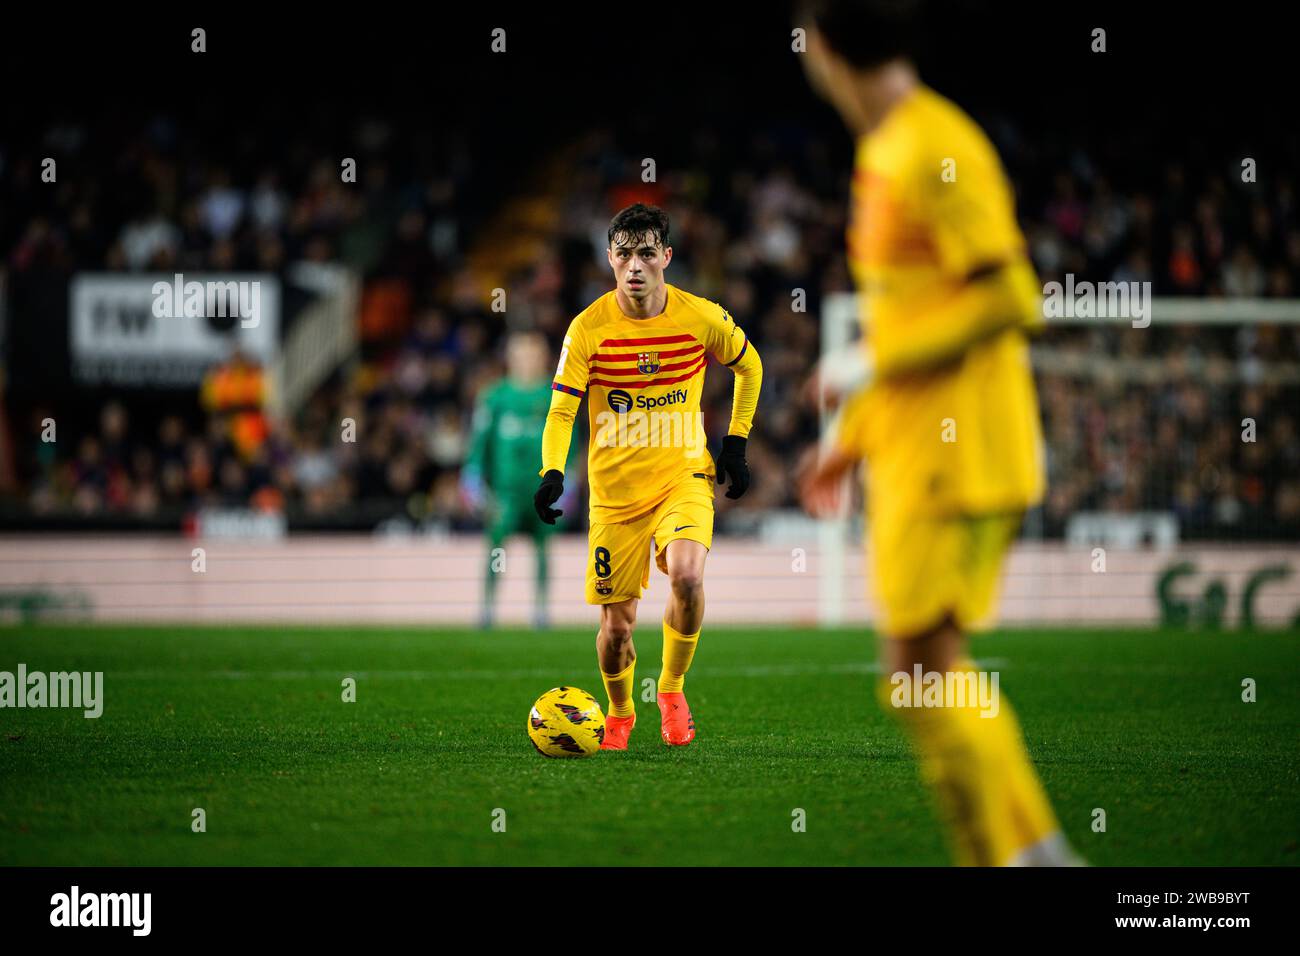 Pedri, FC Barcelona's Spanish player in action during a league match at the Mestalla stadium, Valencia, Spain. Stock Photo